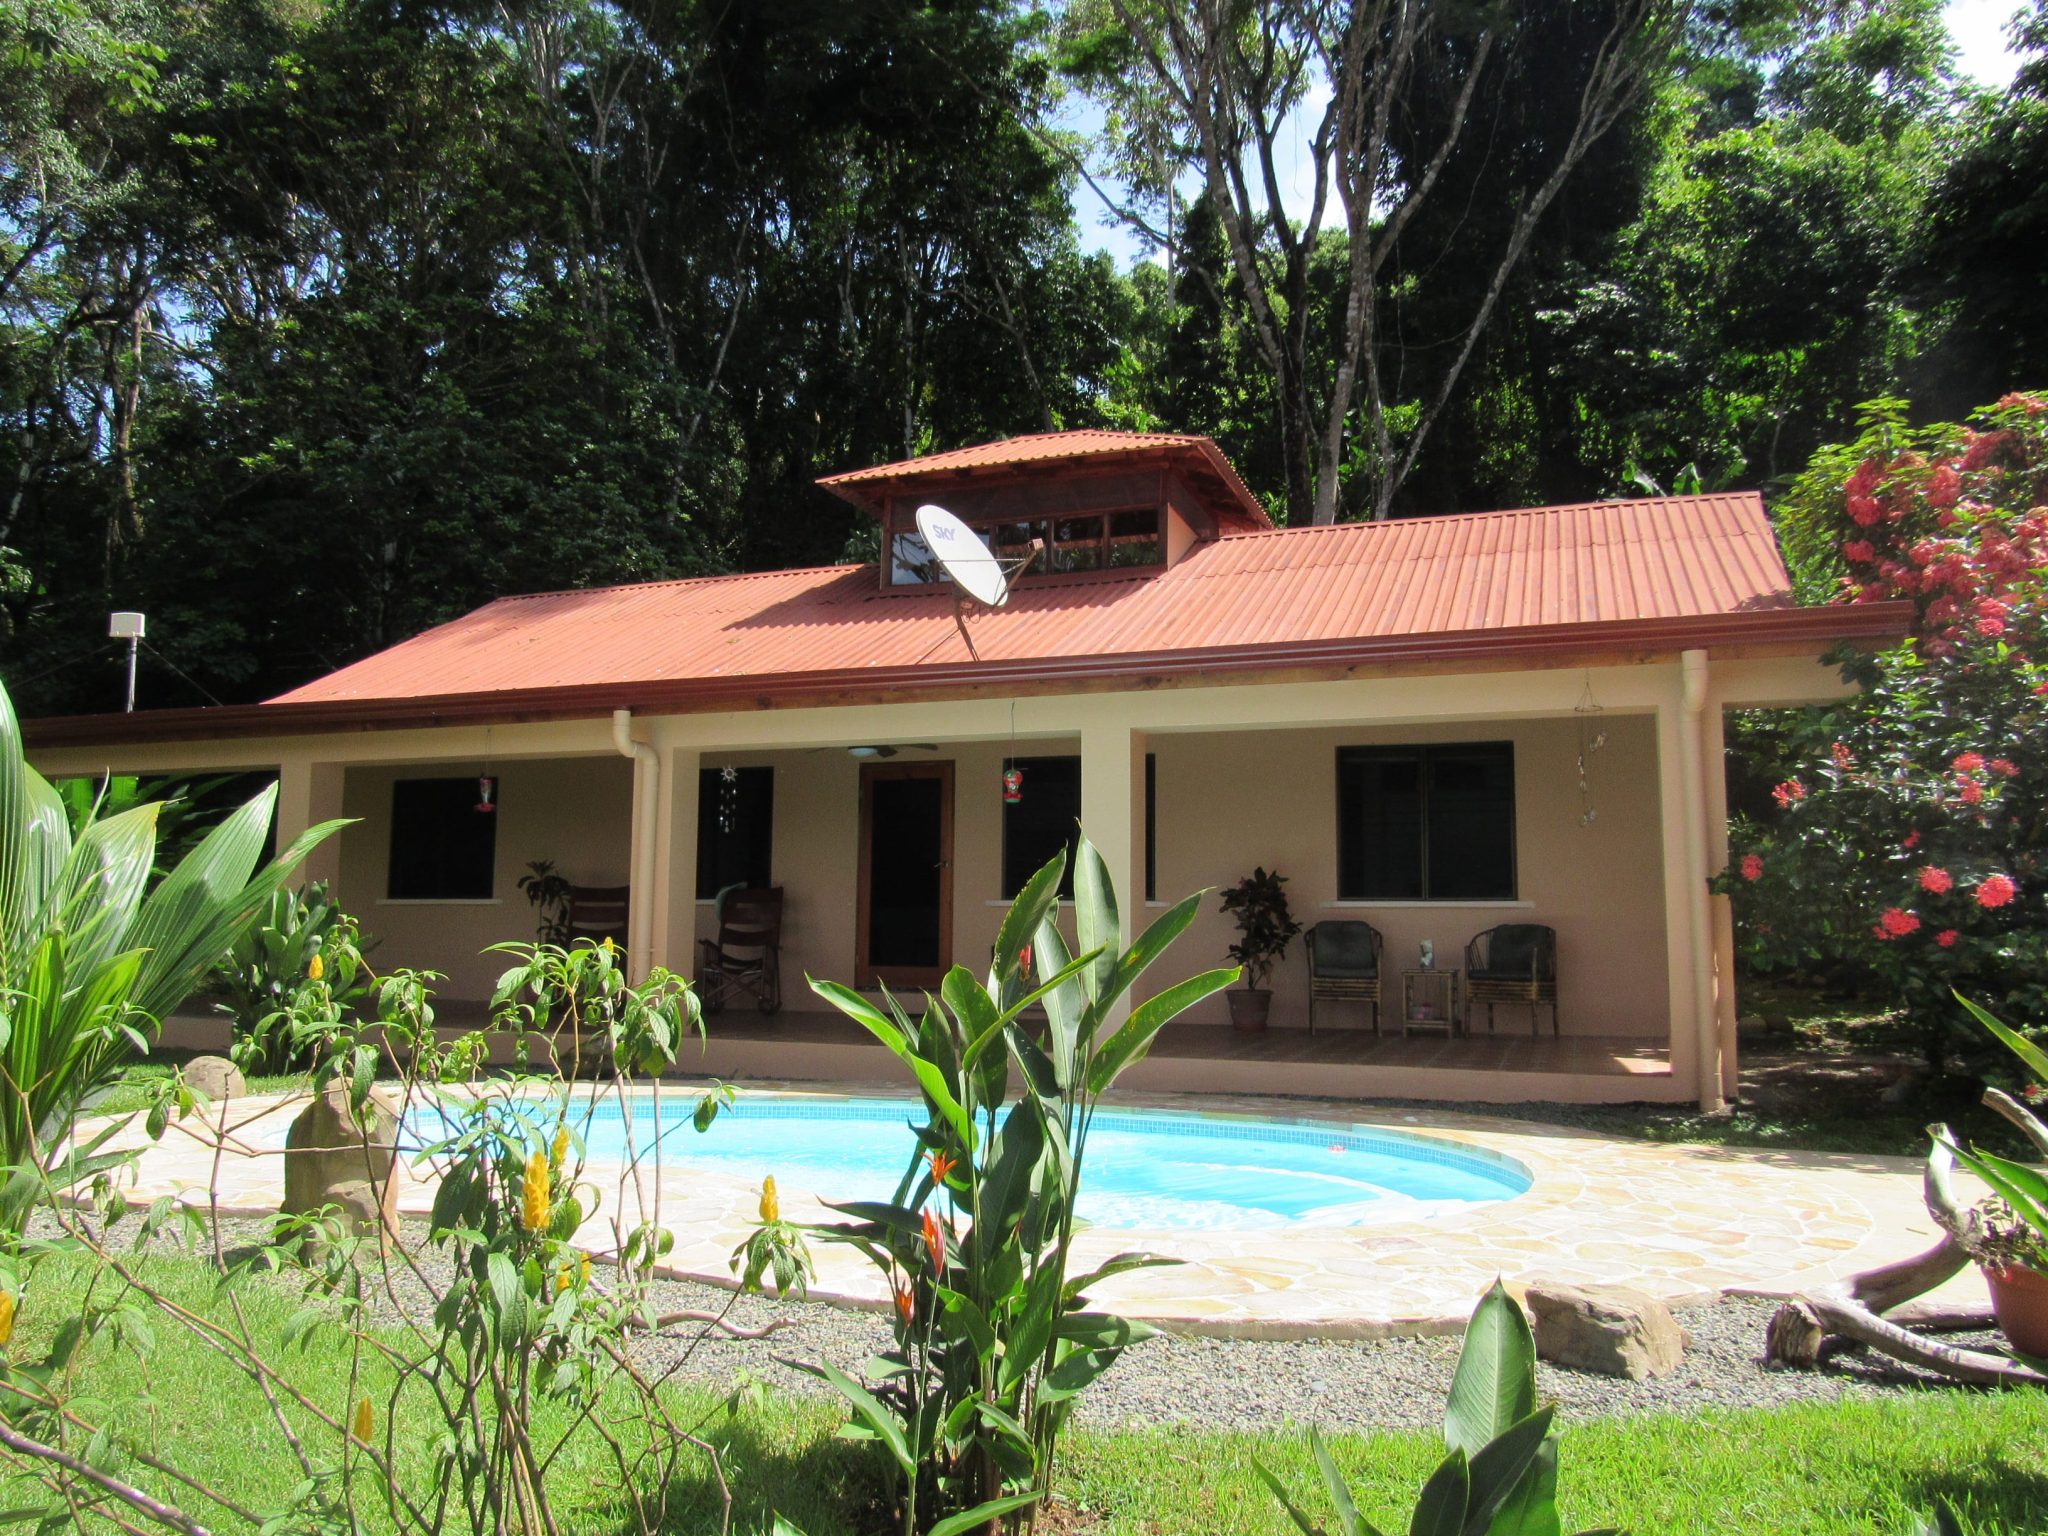 1.25 ACRES - 5 Bedroom Home With Pool And Ocean View!!!